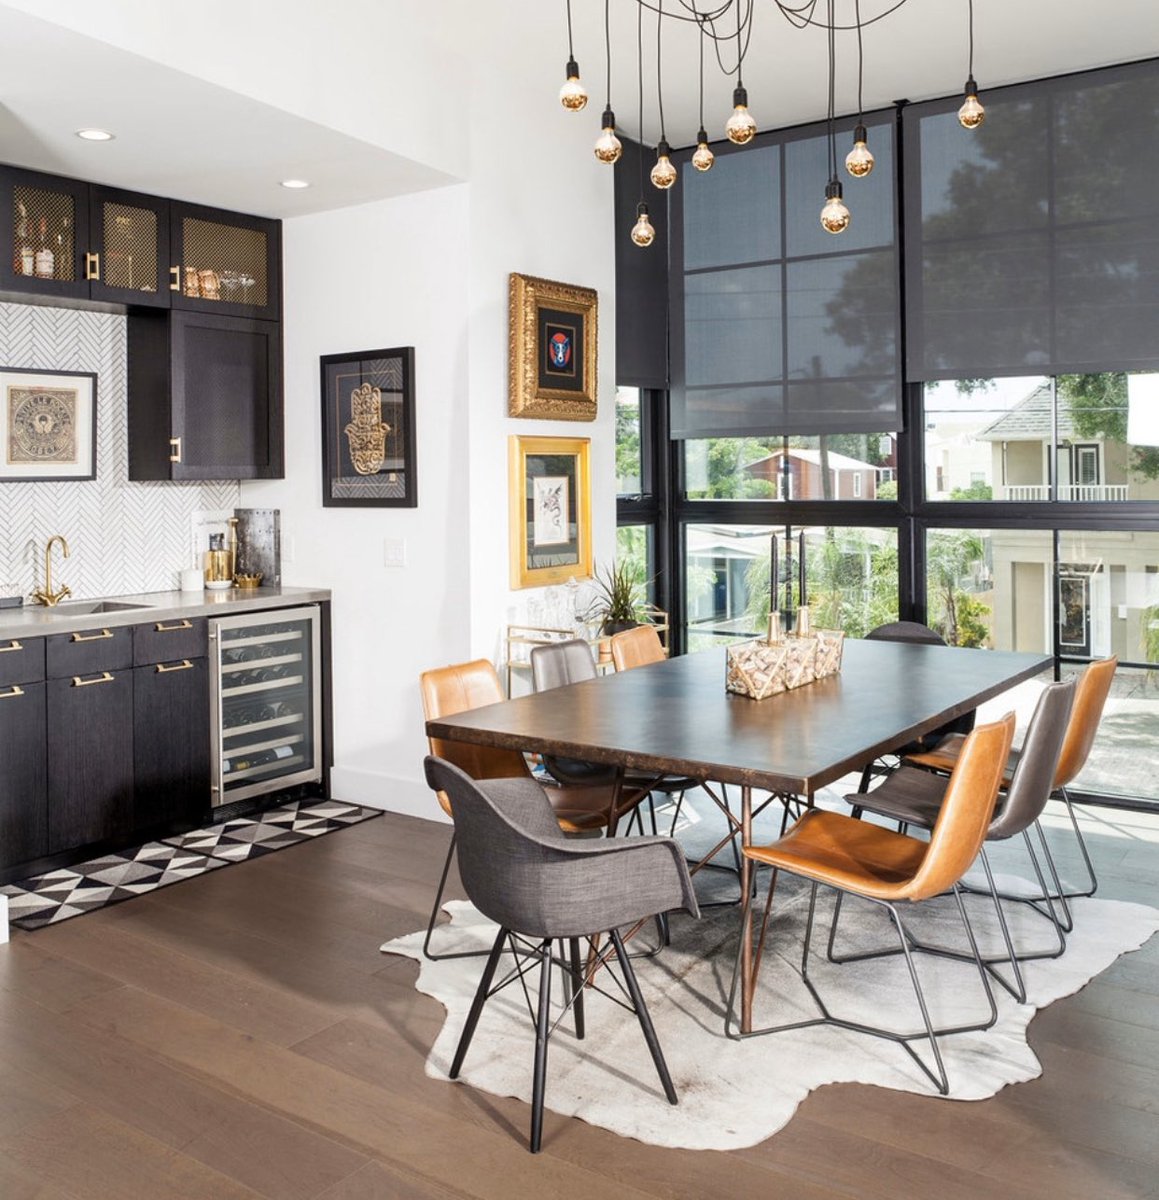 What’s your style dining area?1. Modern2. Industrial3. Transitional4. Traditional